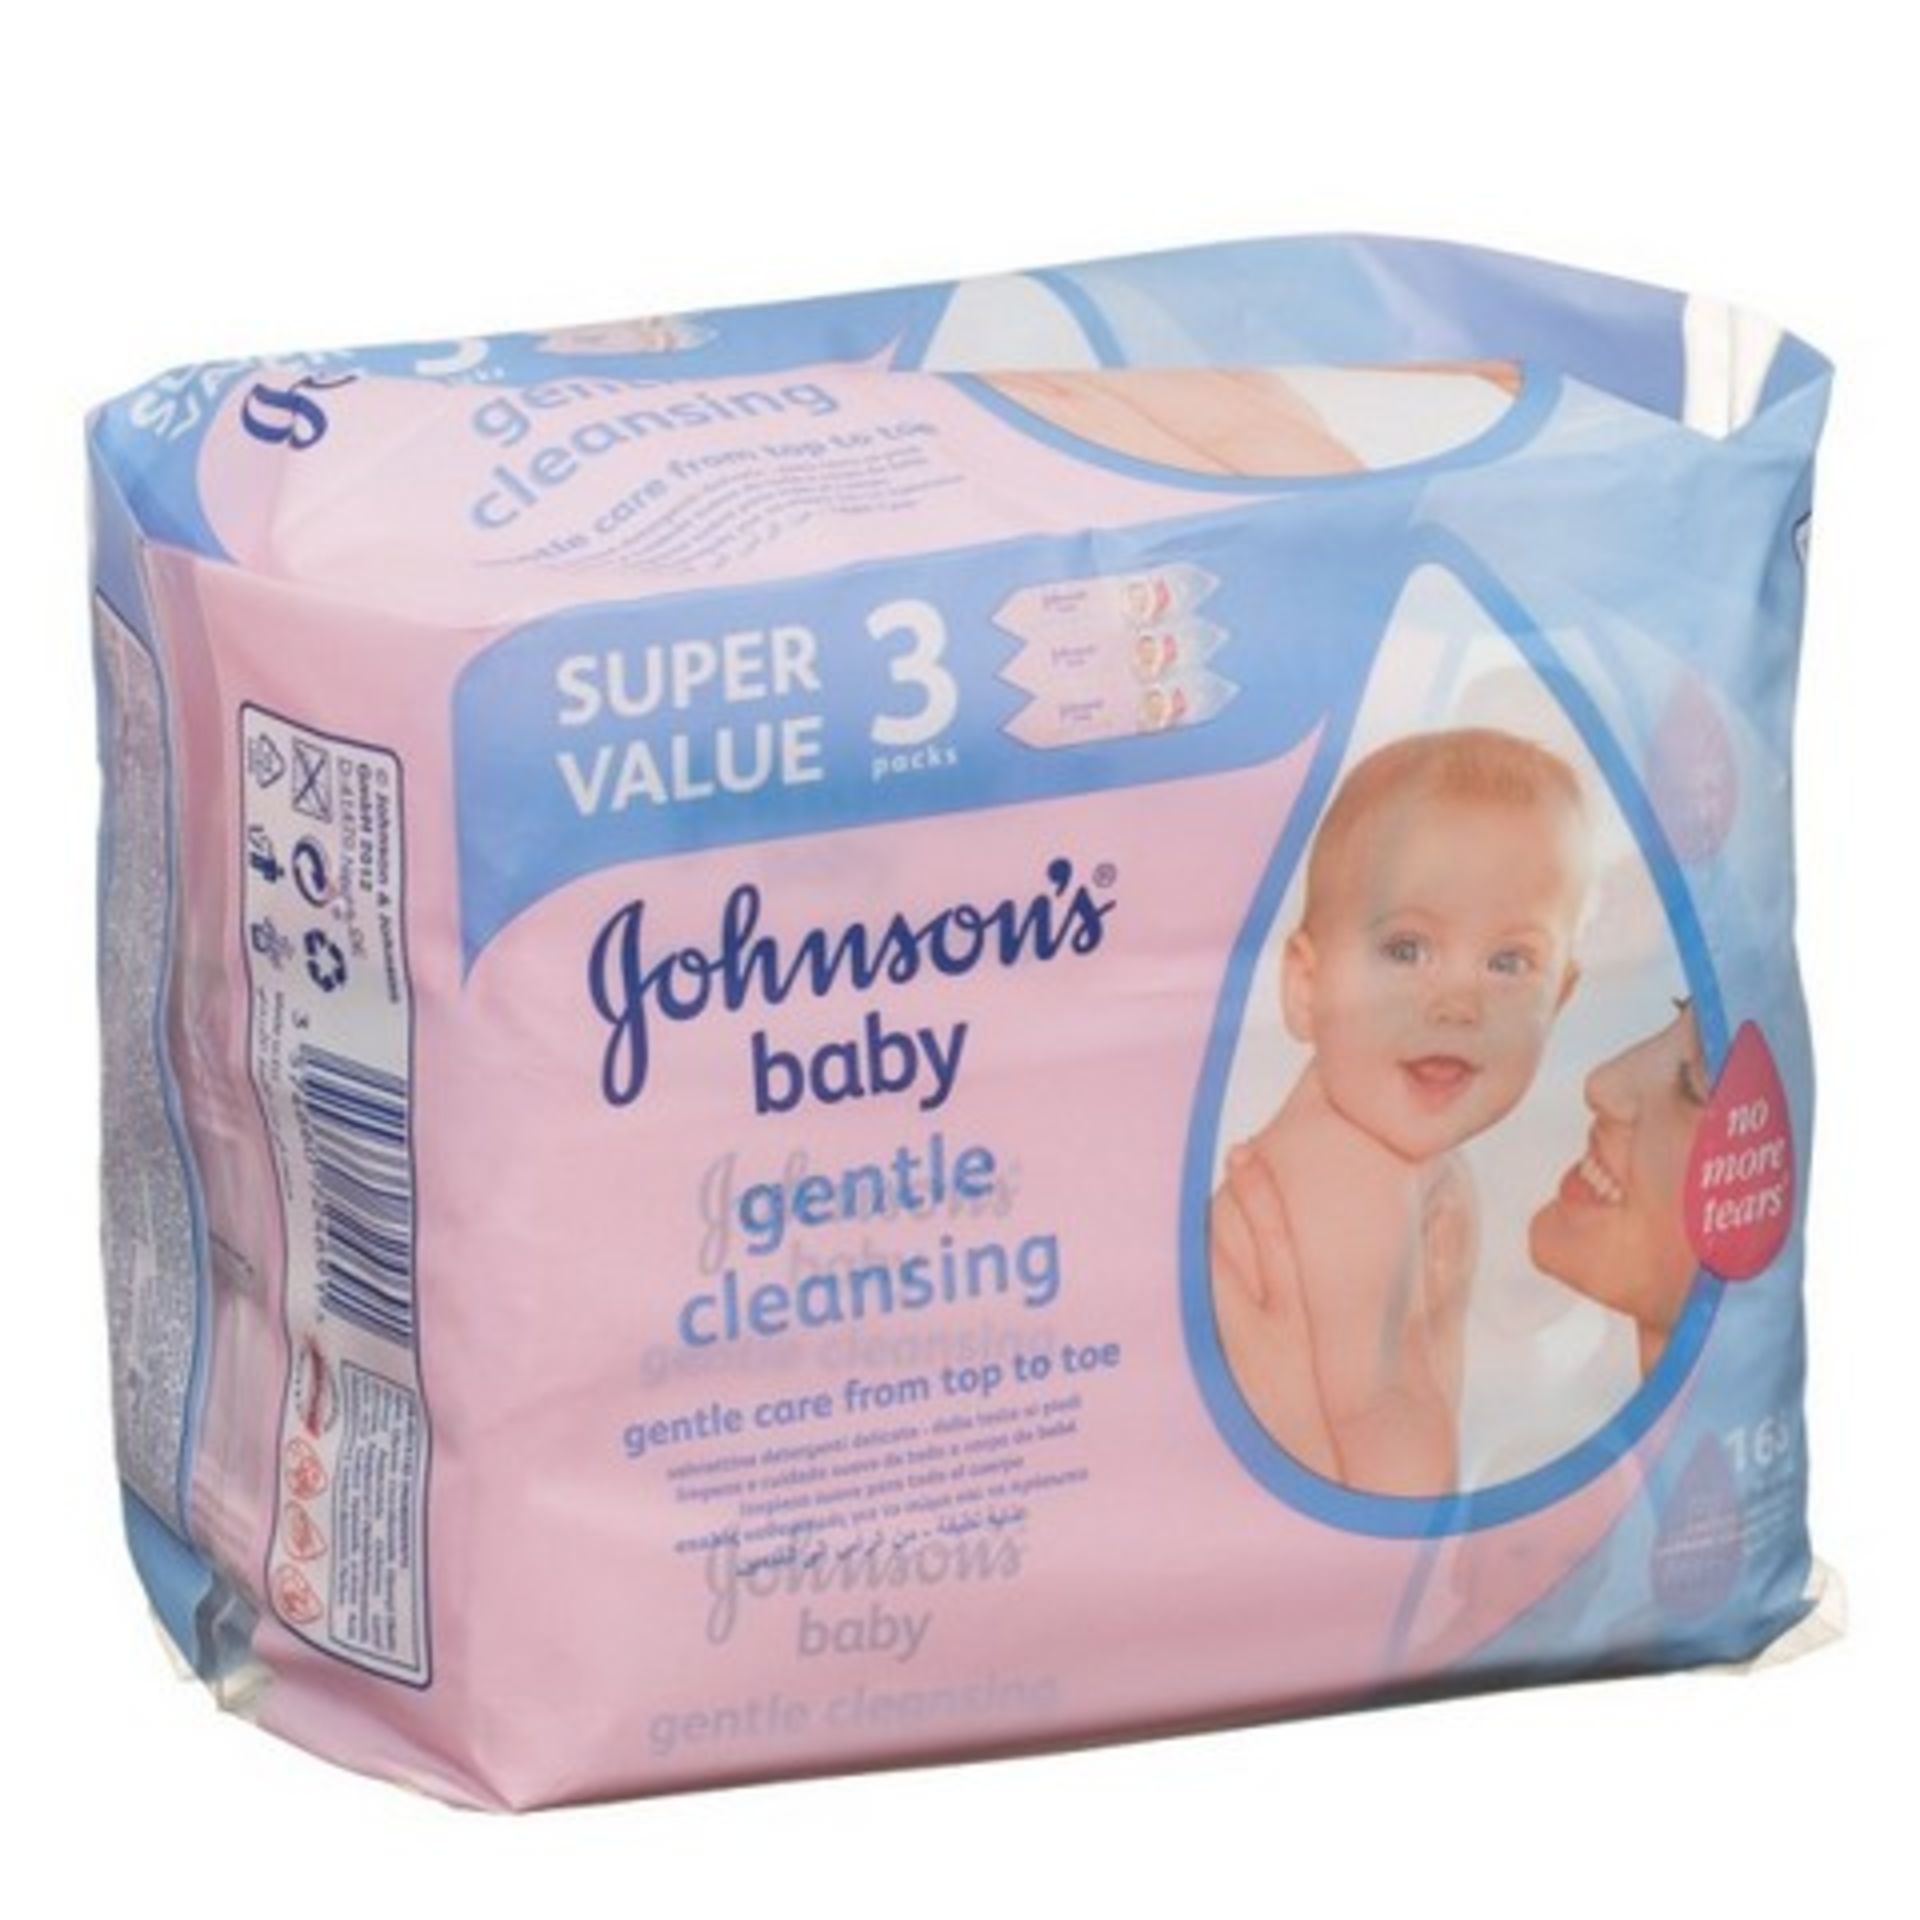 + VAT Brand New One Triple Pack Of 168 Johnsons Baby Gentle Cleansing Wipes RRP 9.85 Use By Date Is